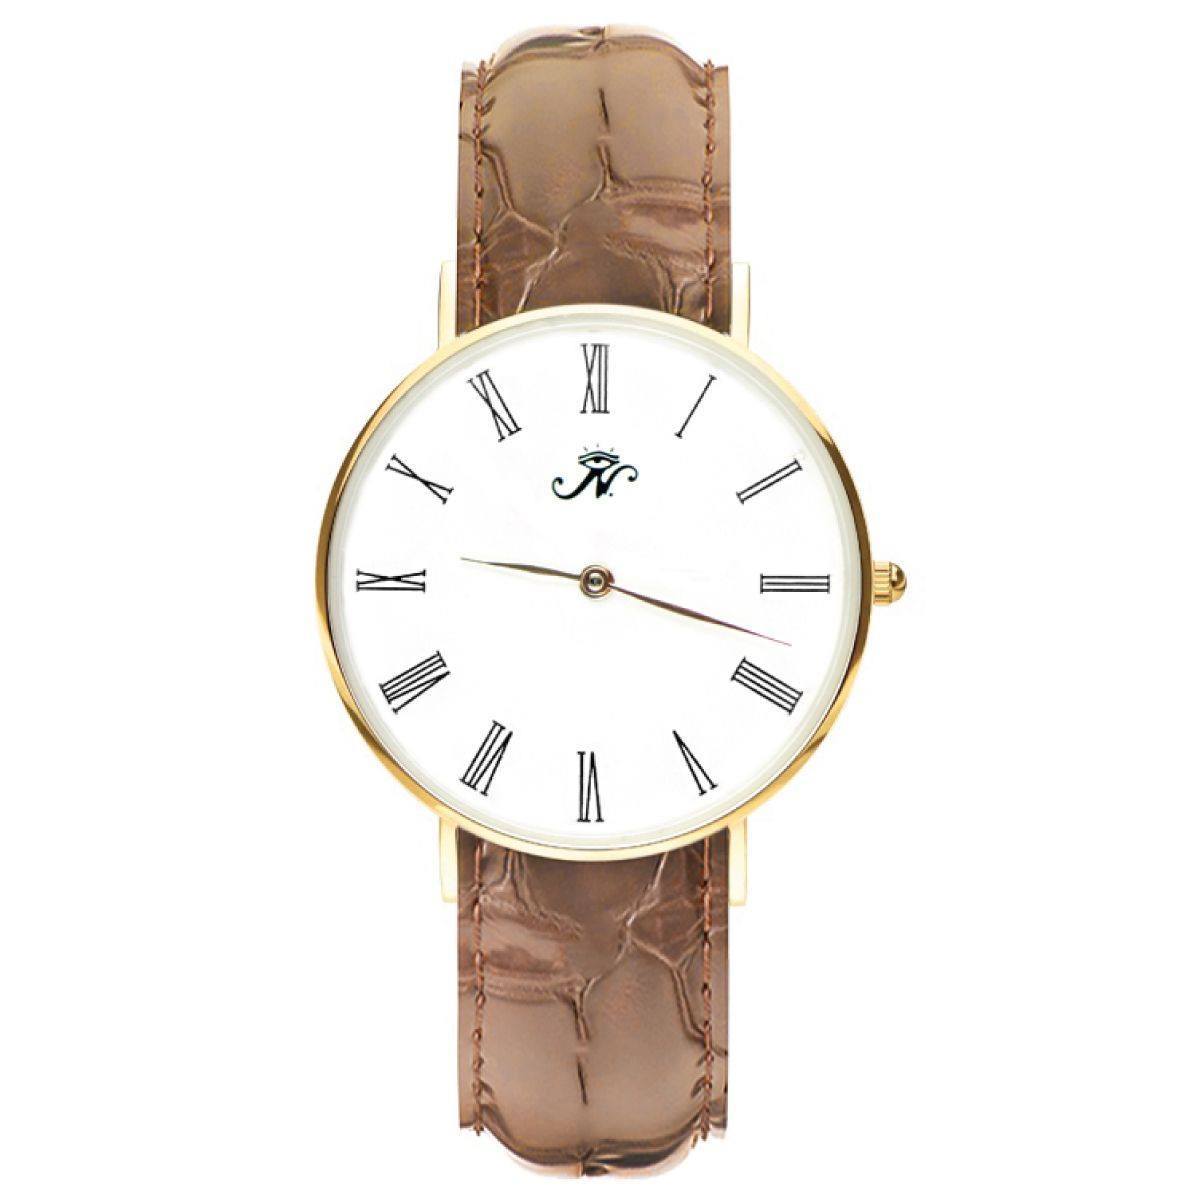 Wellesley - Designer Watch Timepiece in Gold with Brown Alligator Style Genuine Leather and Roman Numerals Style Face